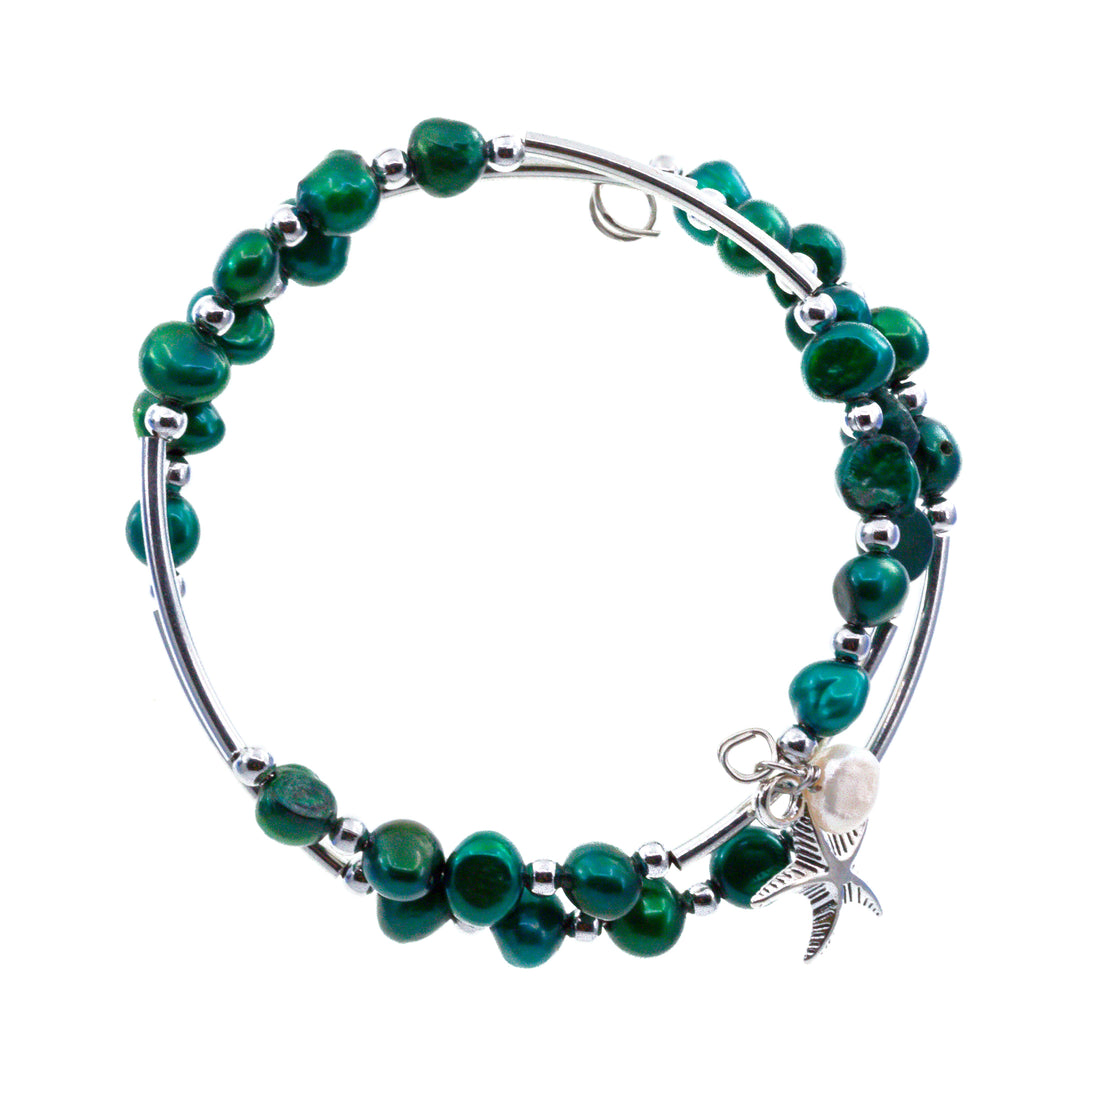 Green Double Wire Wrap Stainless Steel Bracelets With Freshwater Pearls